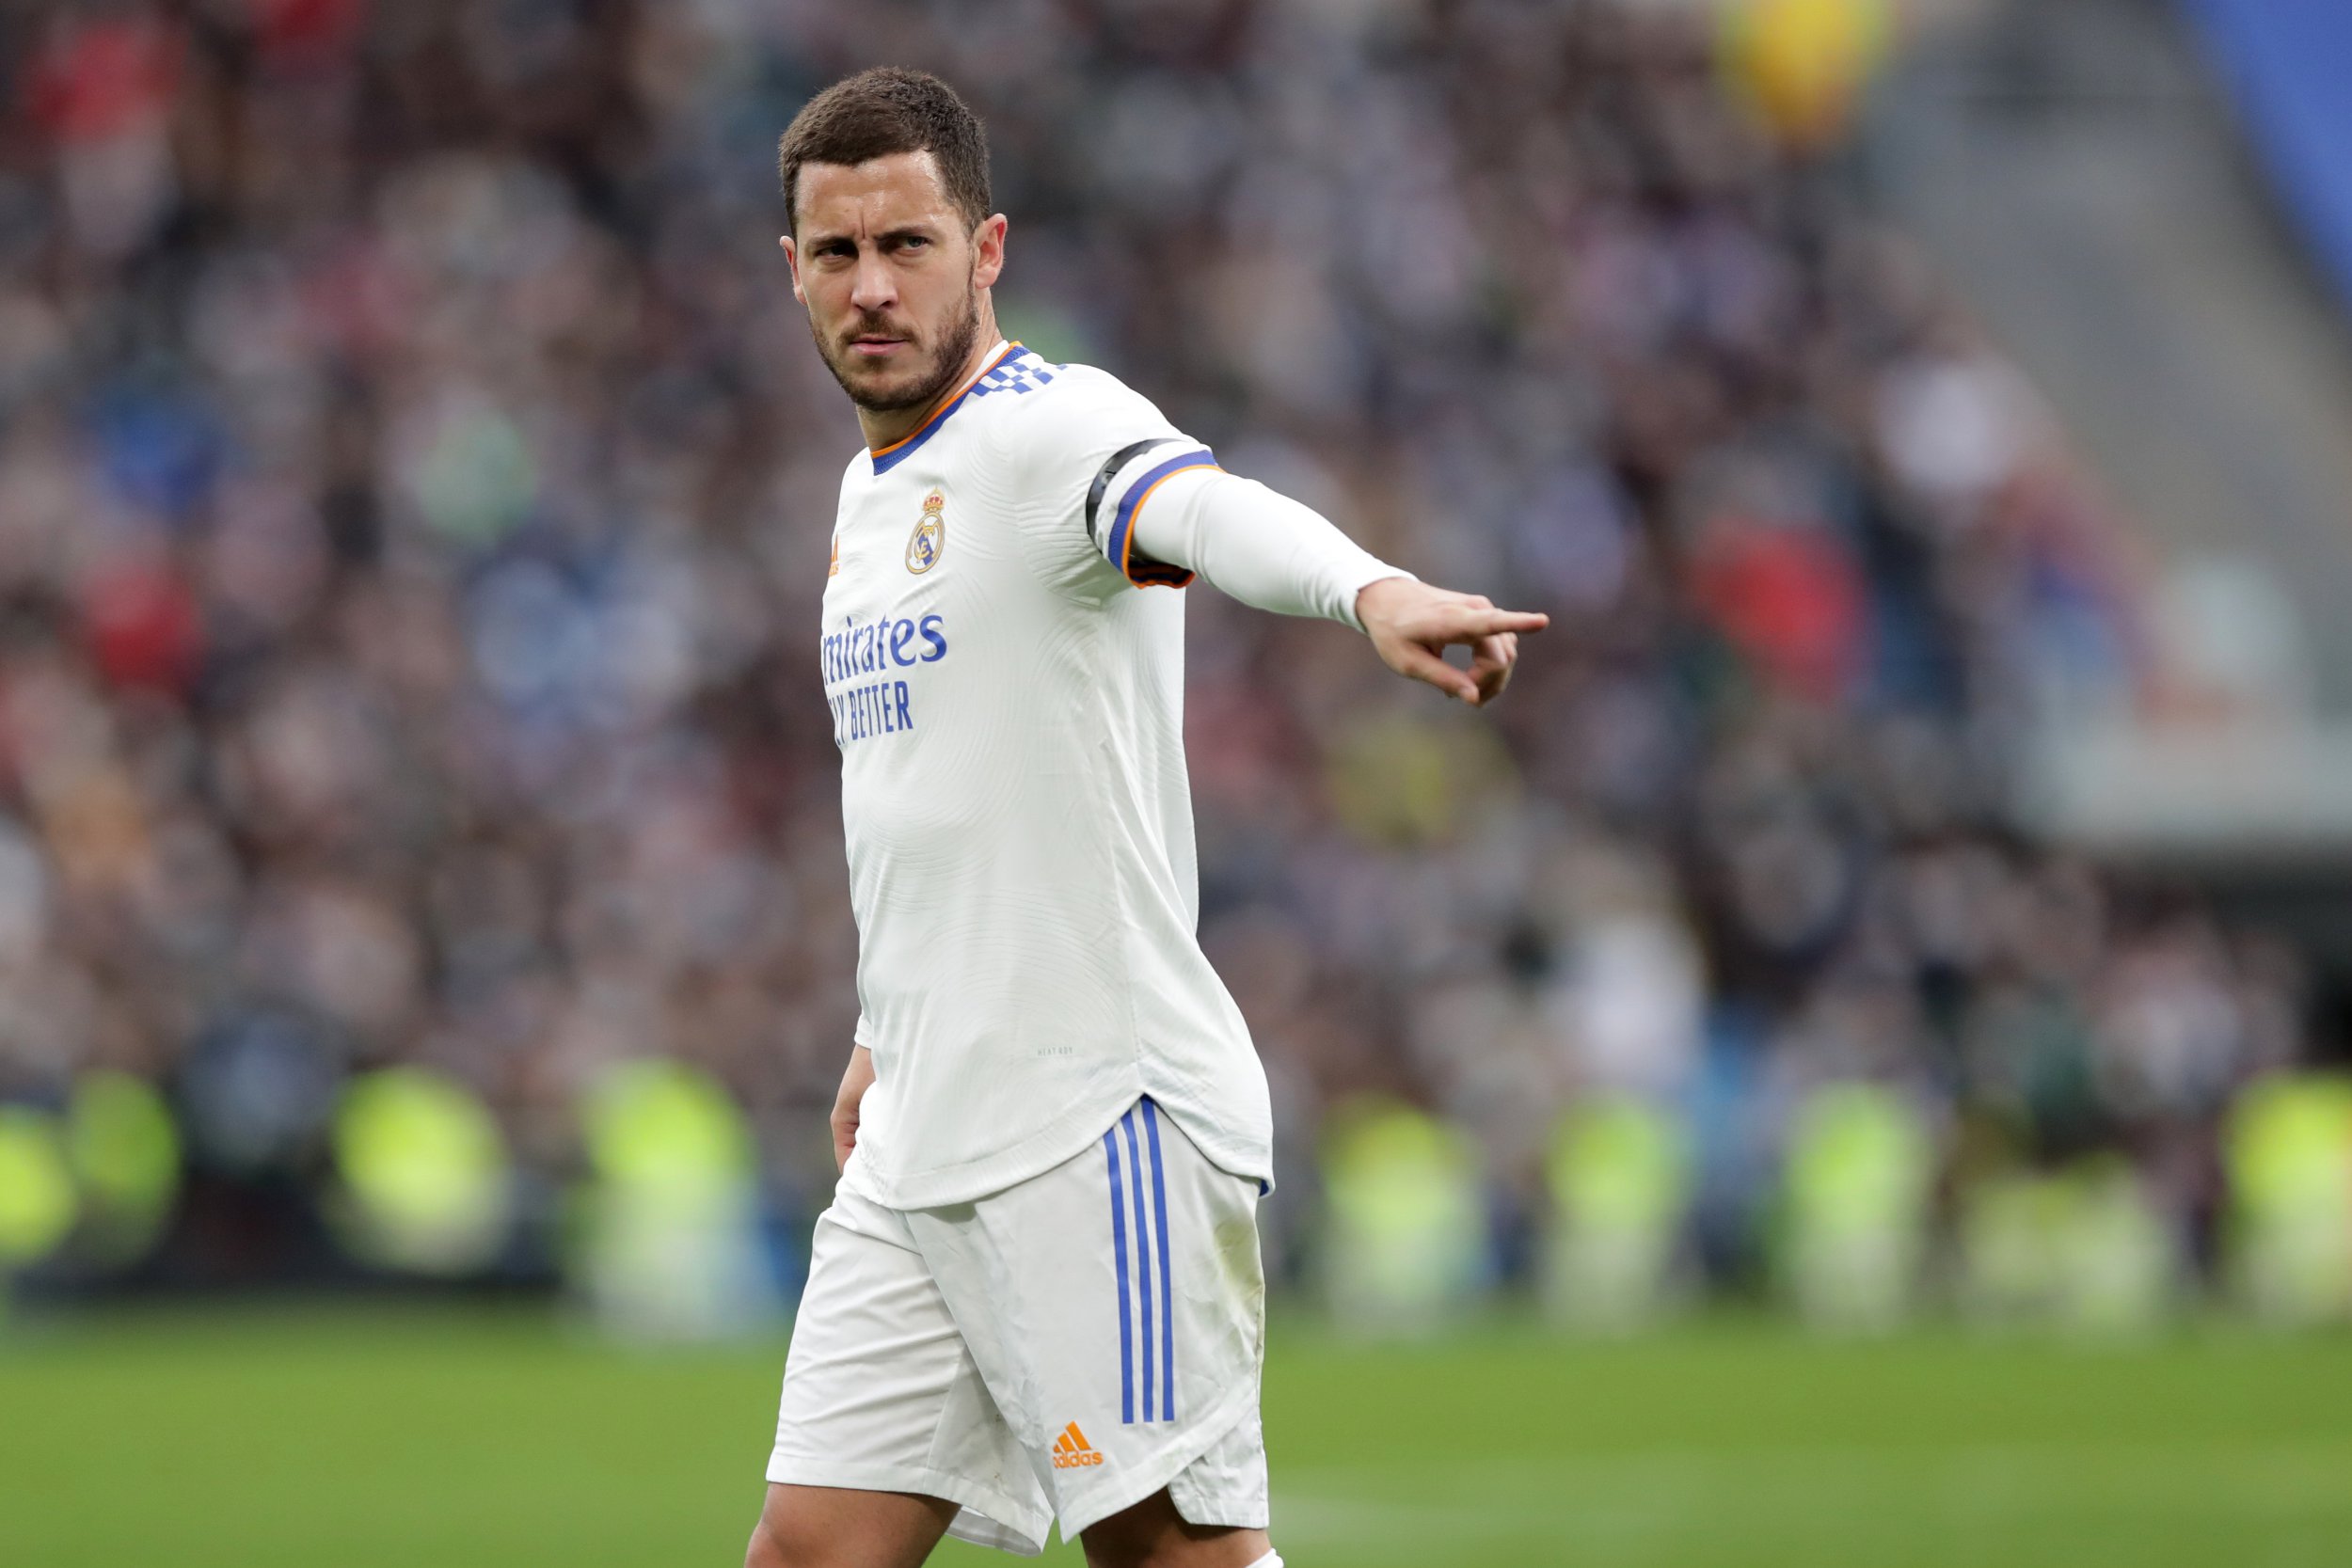 Eden Hazard has started just seven games for Real Madrid in La Liga this season